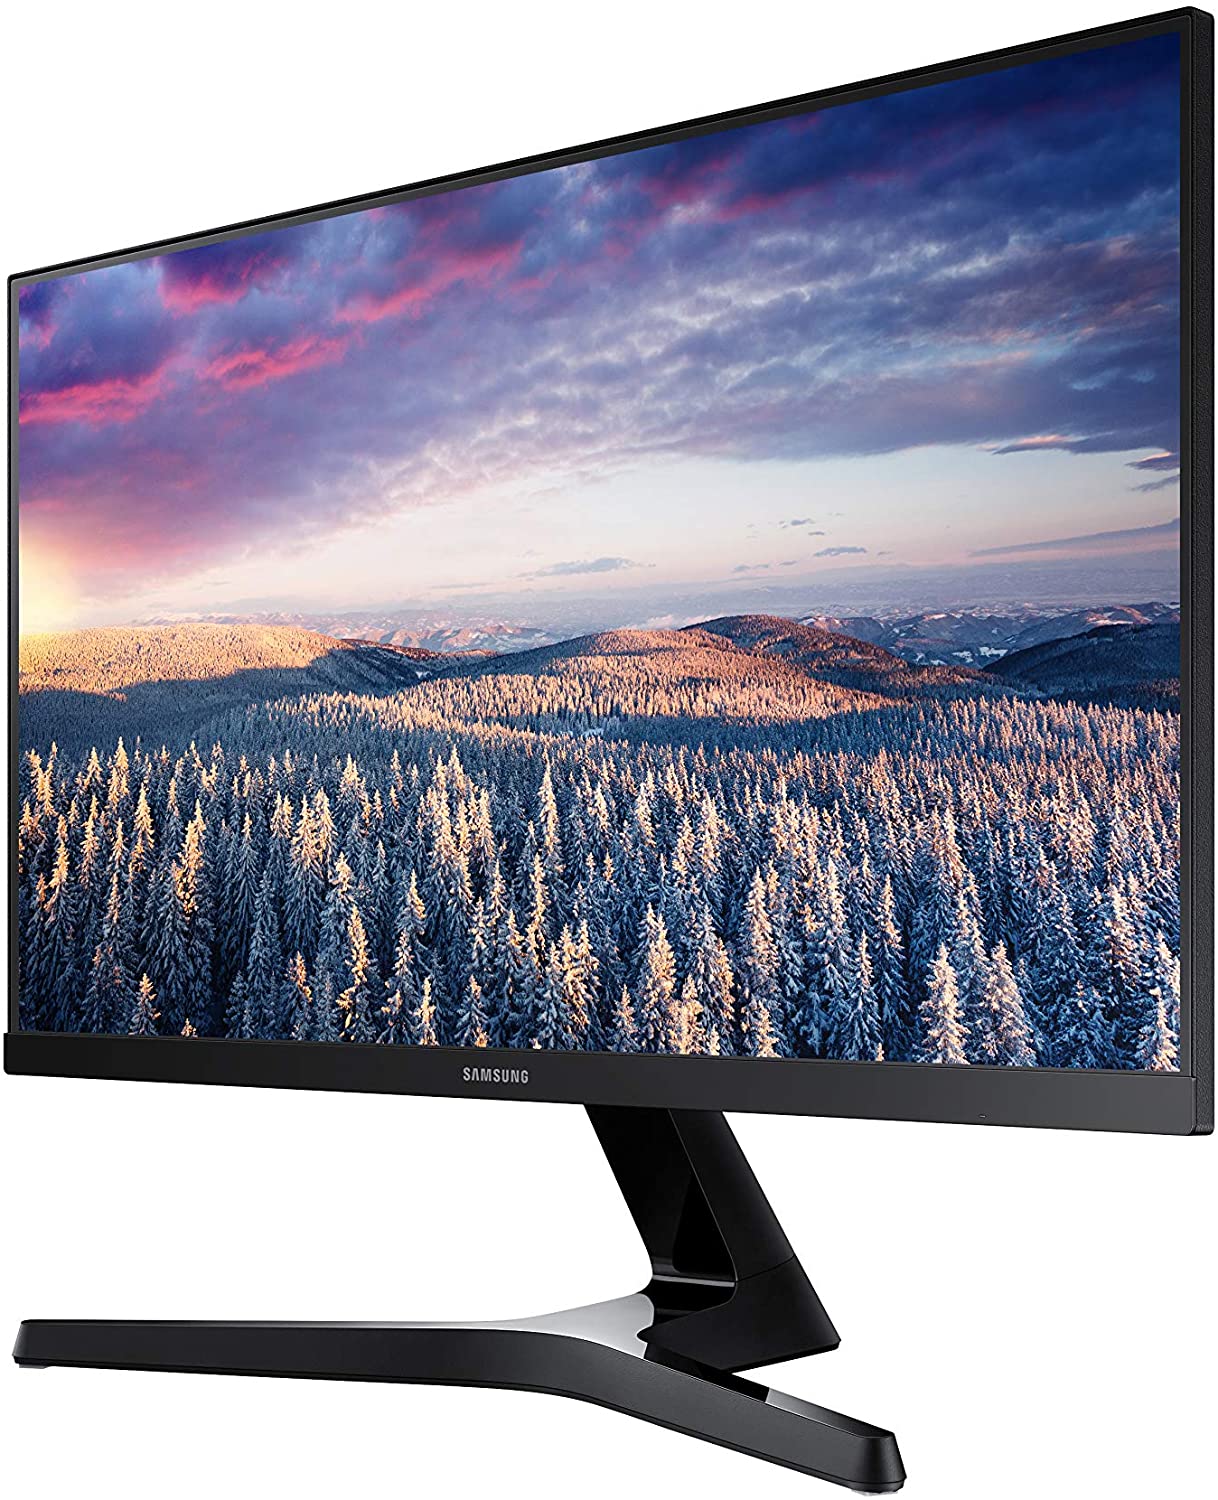 Samsung LS24R356FHNXZA 24" SR35 Series 1920 x 1080 75Hz LED Monitor for Business - Certified Refurbished